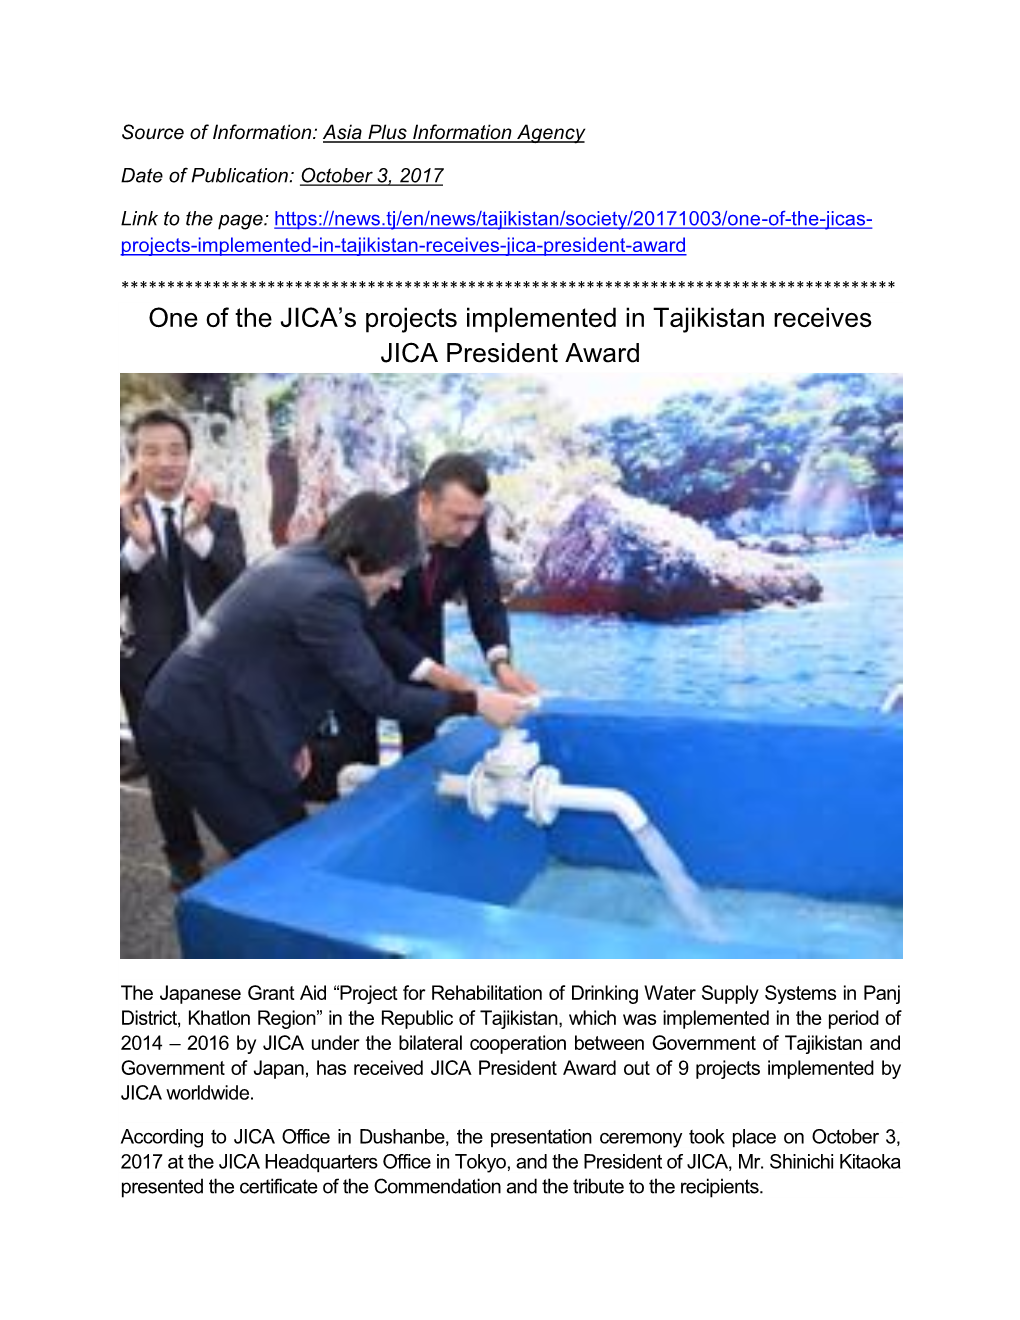 One of the JICA's Projects Implemented in Tajikistan Receives